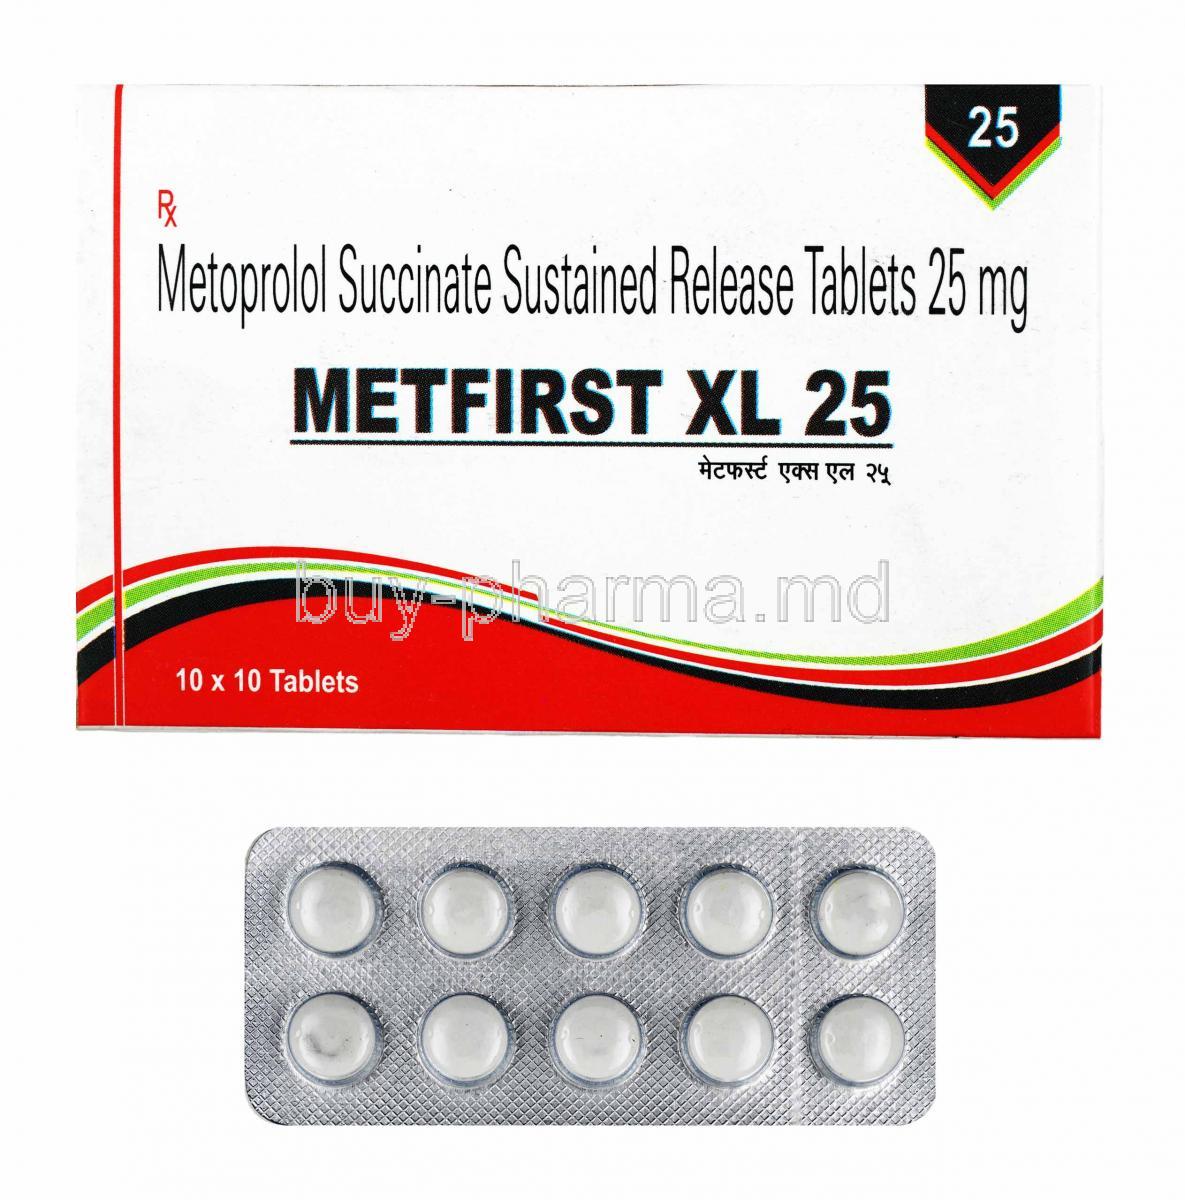 Metfirst XL, Metoprolol Succinate 25mg box and tablets